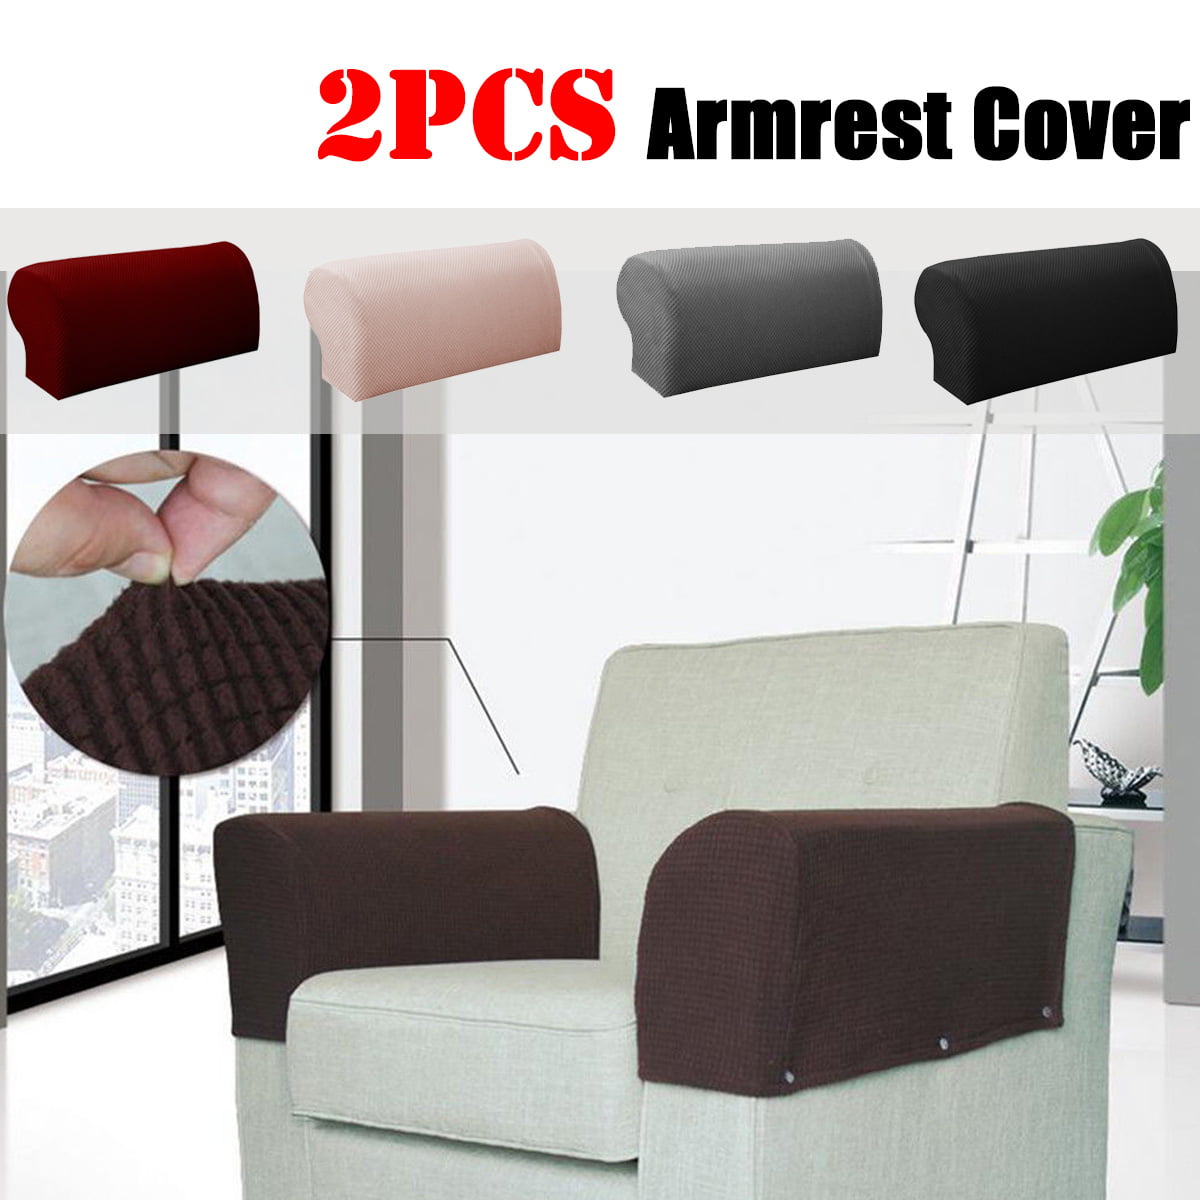 azurely Armchair Armrest Cover Sofa 1 Pair Double-Faced Non-slip Sofa Arm Cover Stretch Comfortable & Soft Corn Velour Spandex Armchair Arm Covers Furniture Protector For Chair